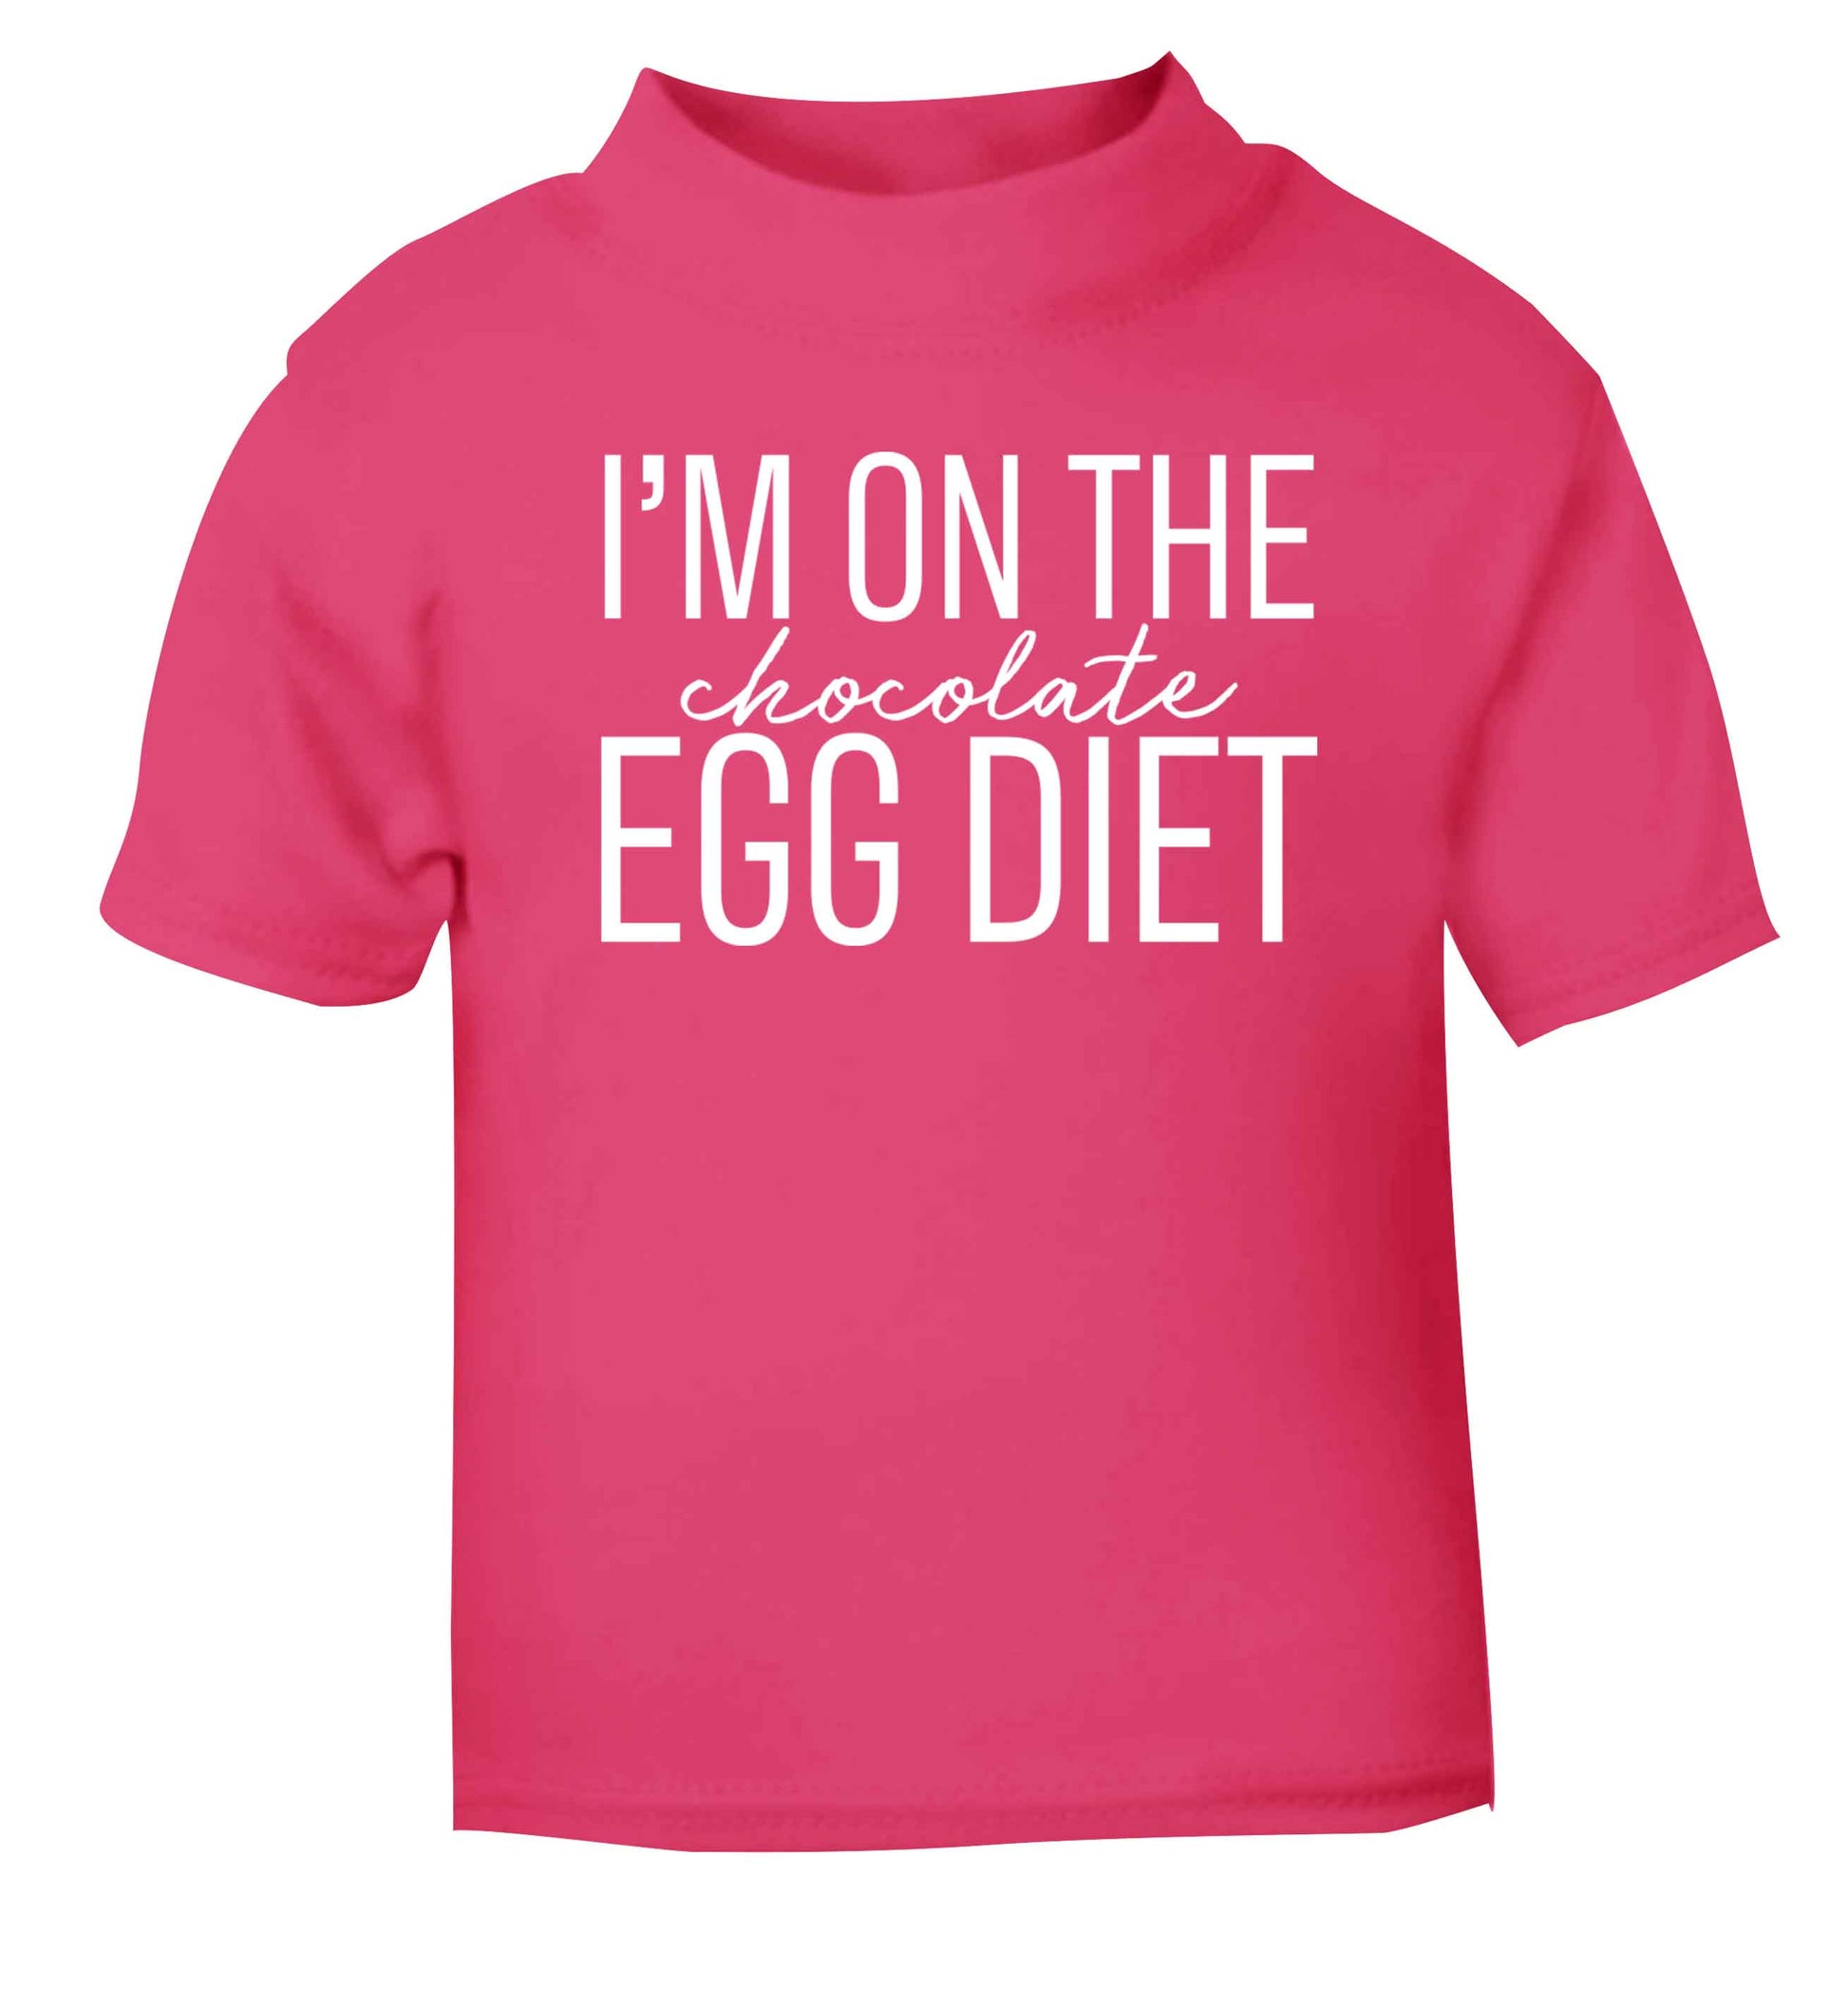 I'm on the chocolate egg diet pink baby toddler Tshirt 2 Years